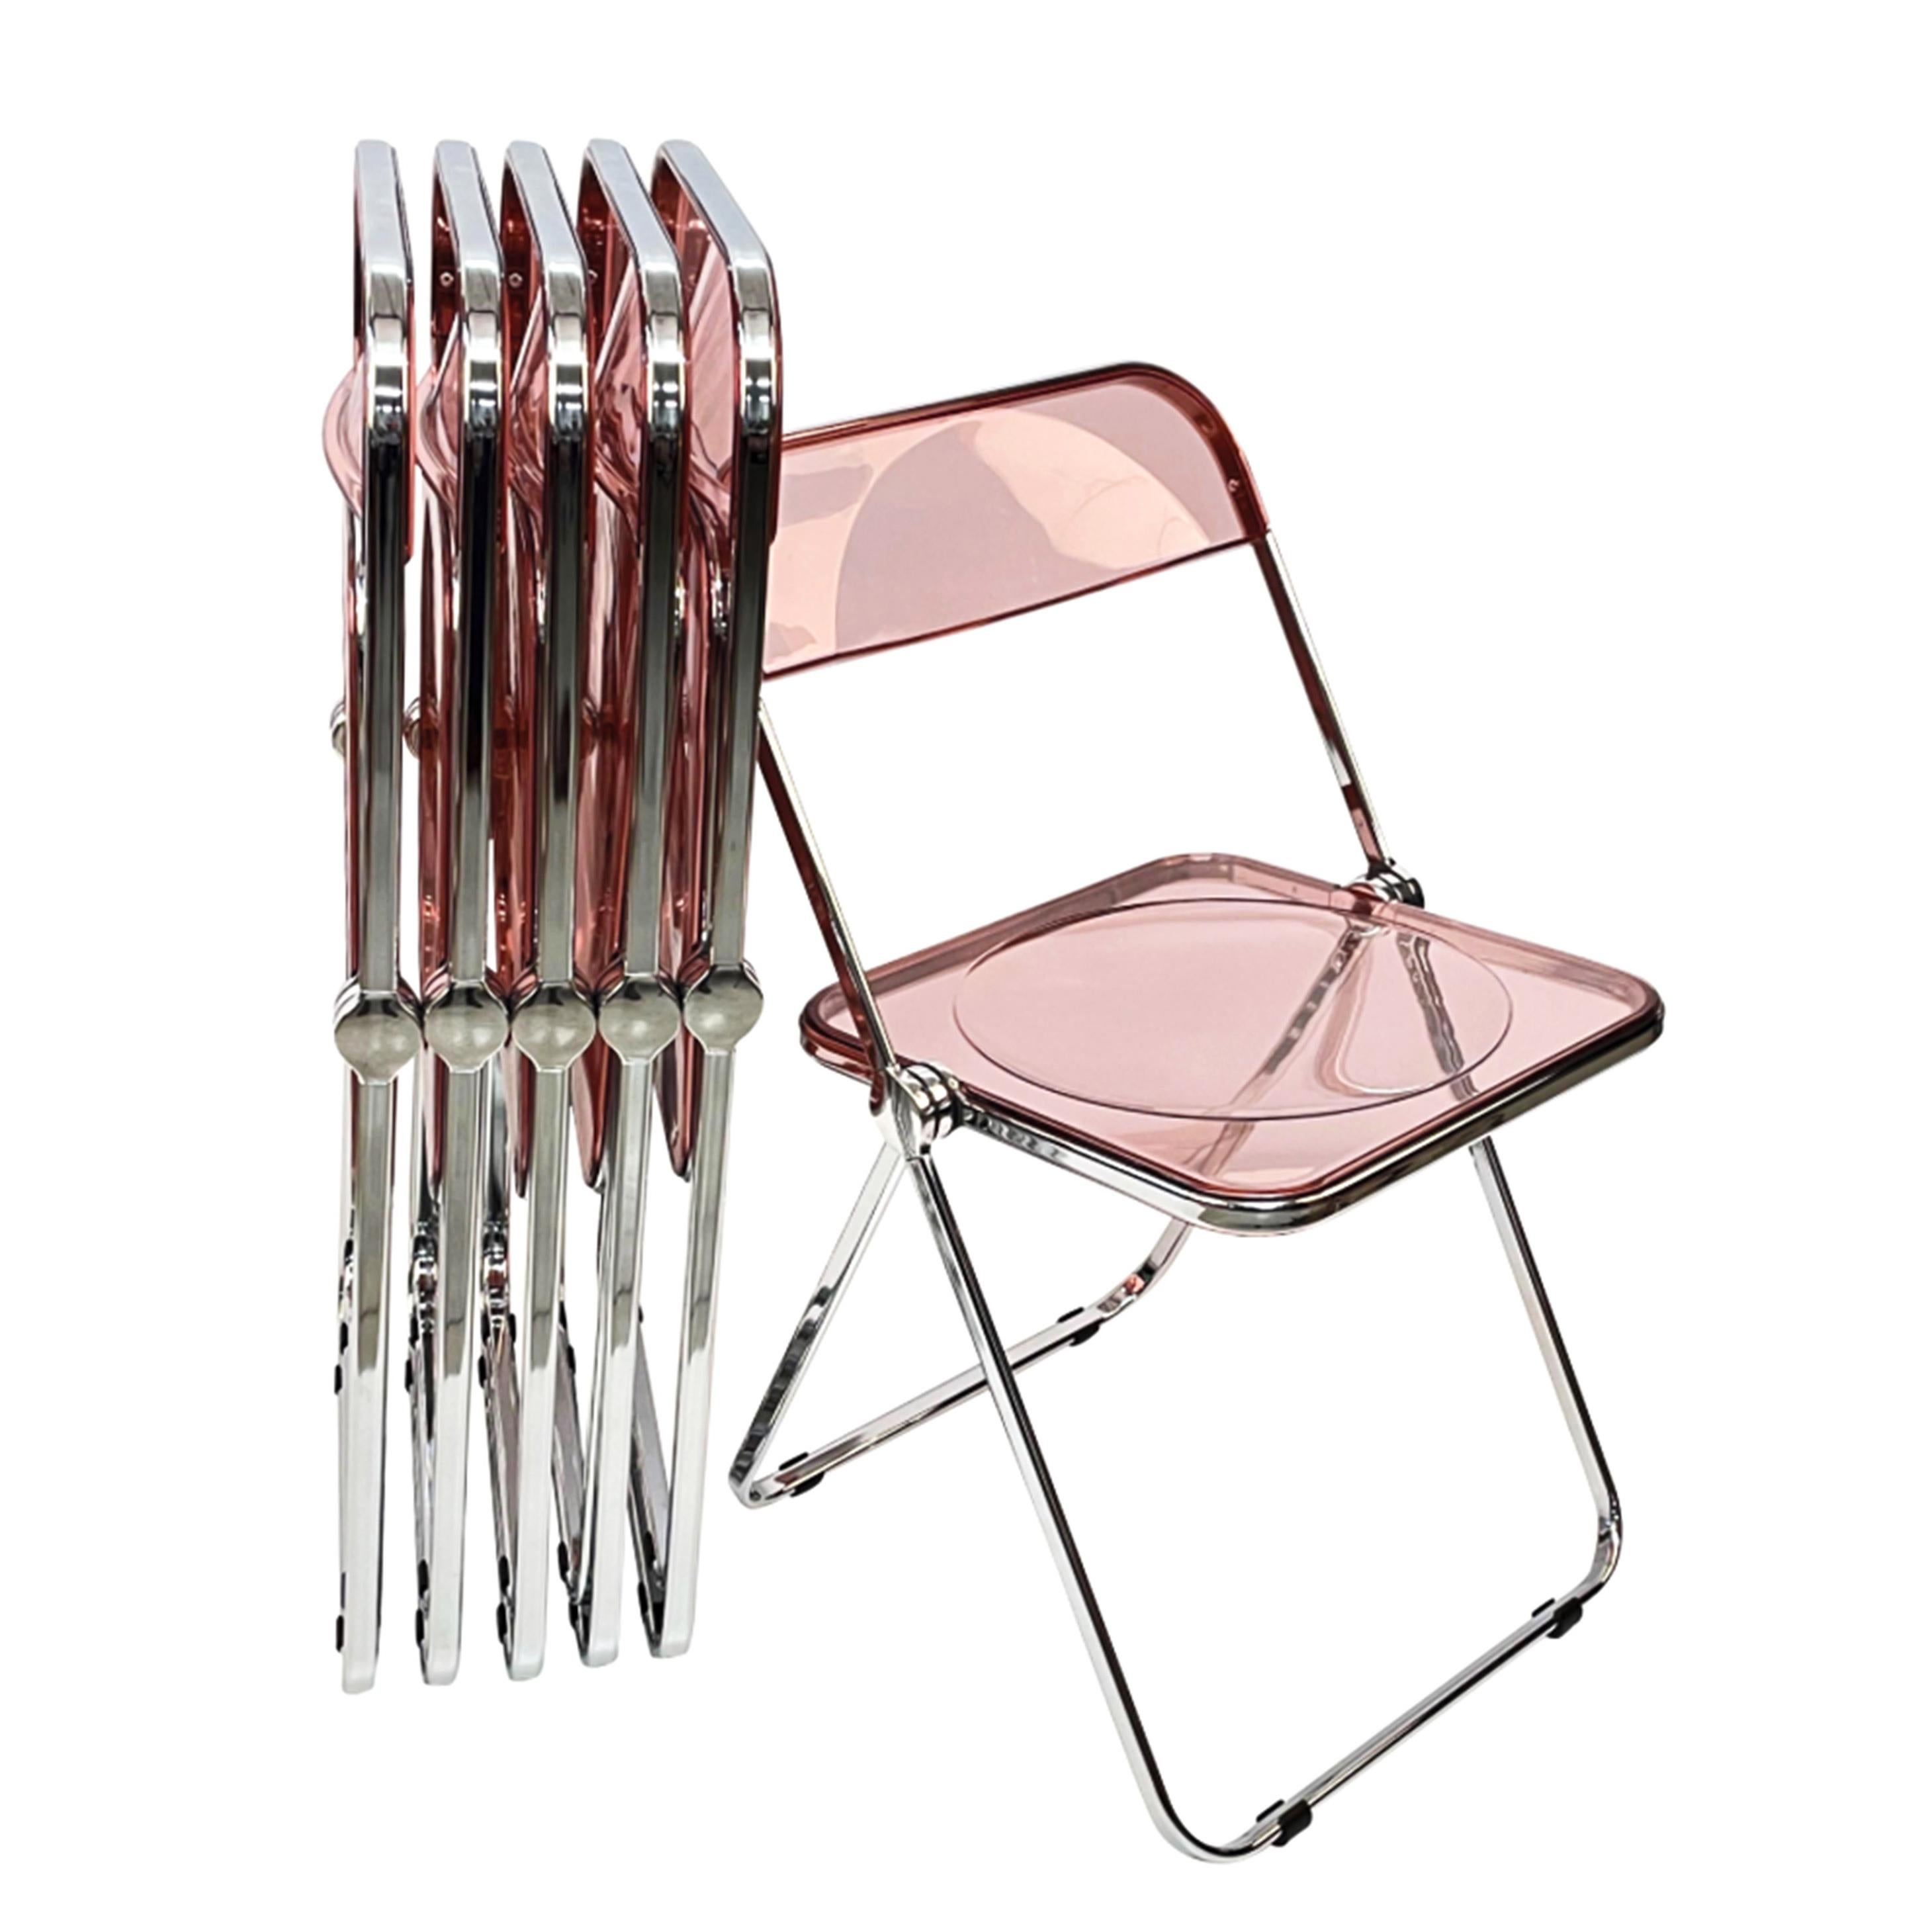 20th Century Set of 6 Lucite Pink and Chrome Plia Chairs, Piretti for Castelli, Italy 1970s For Sale